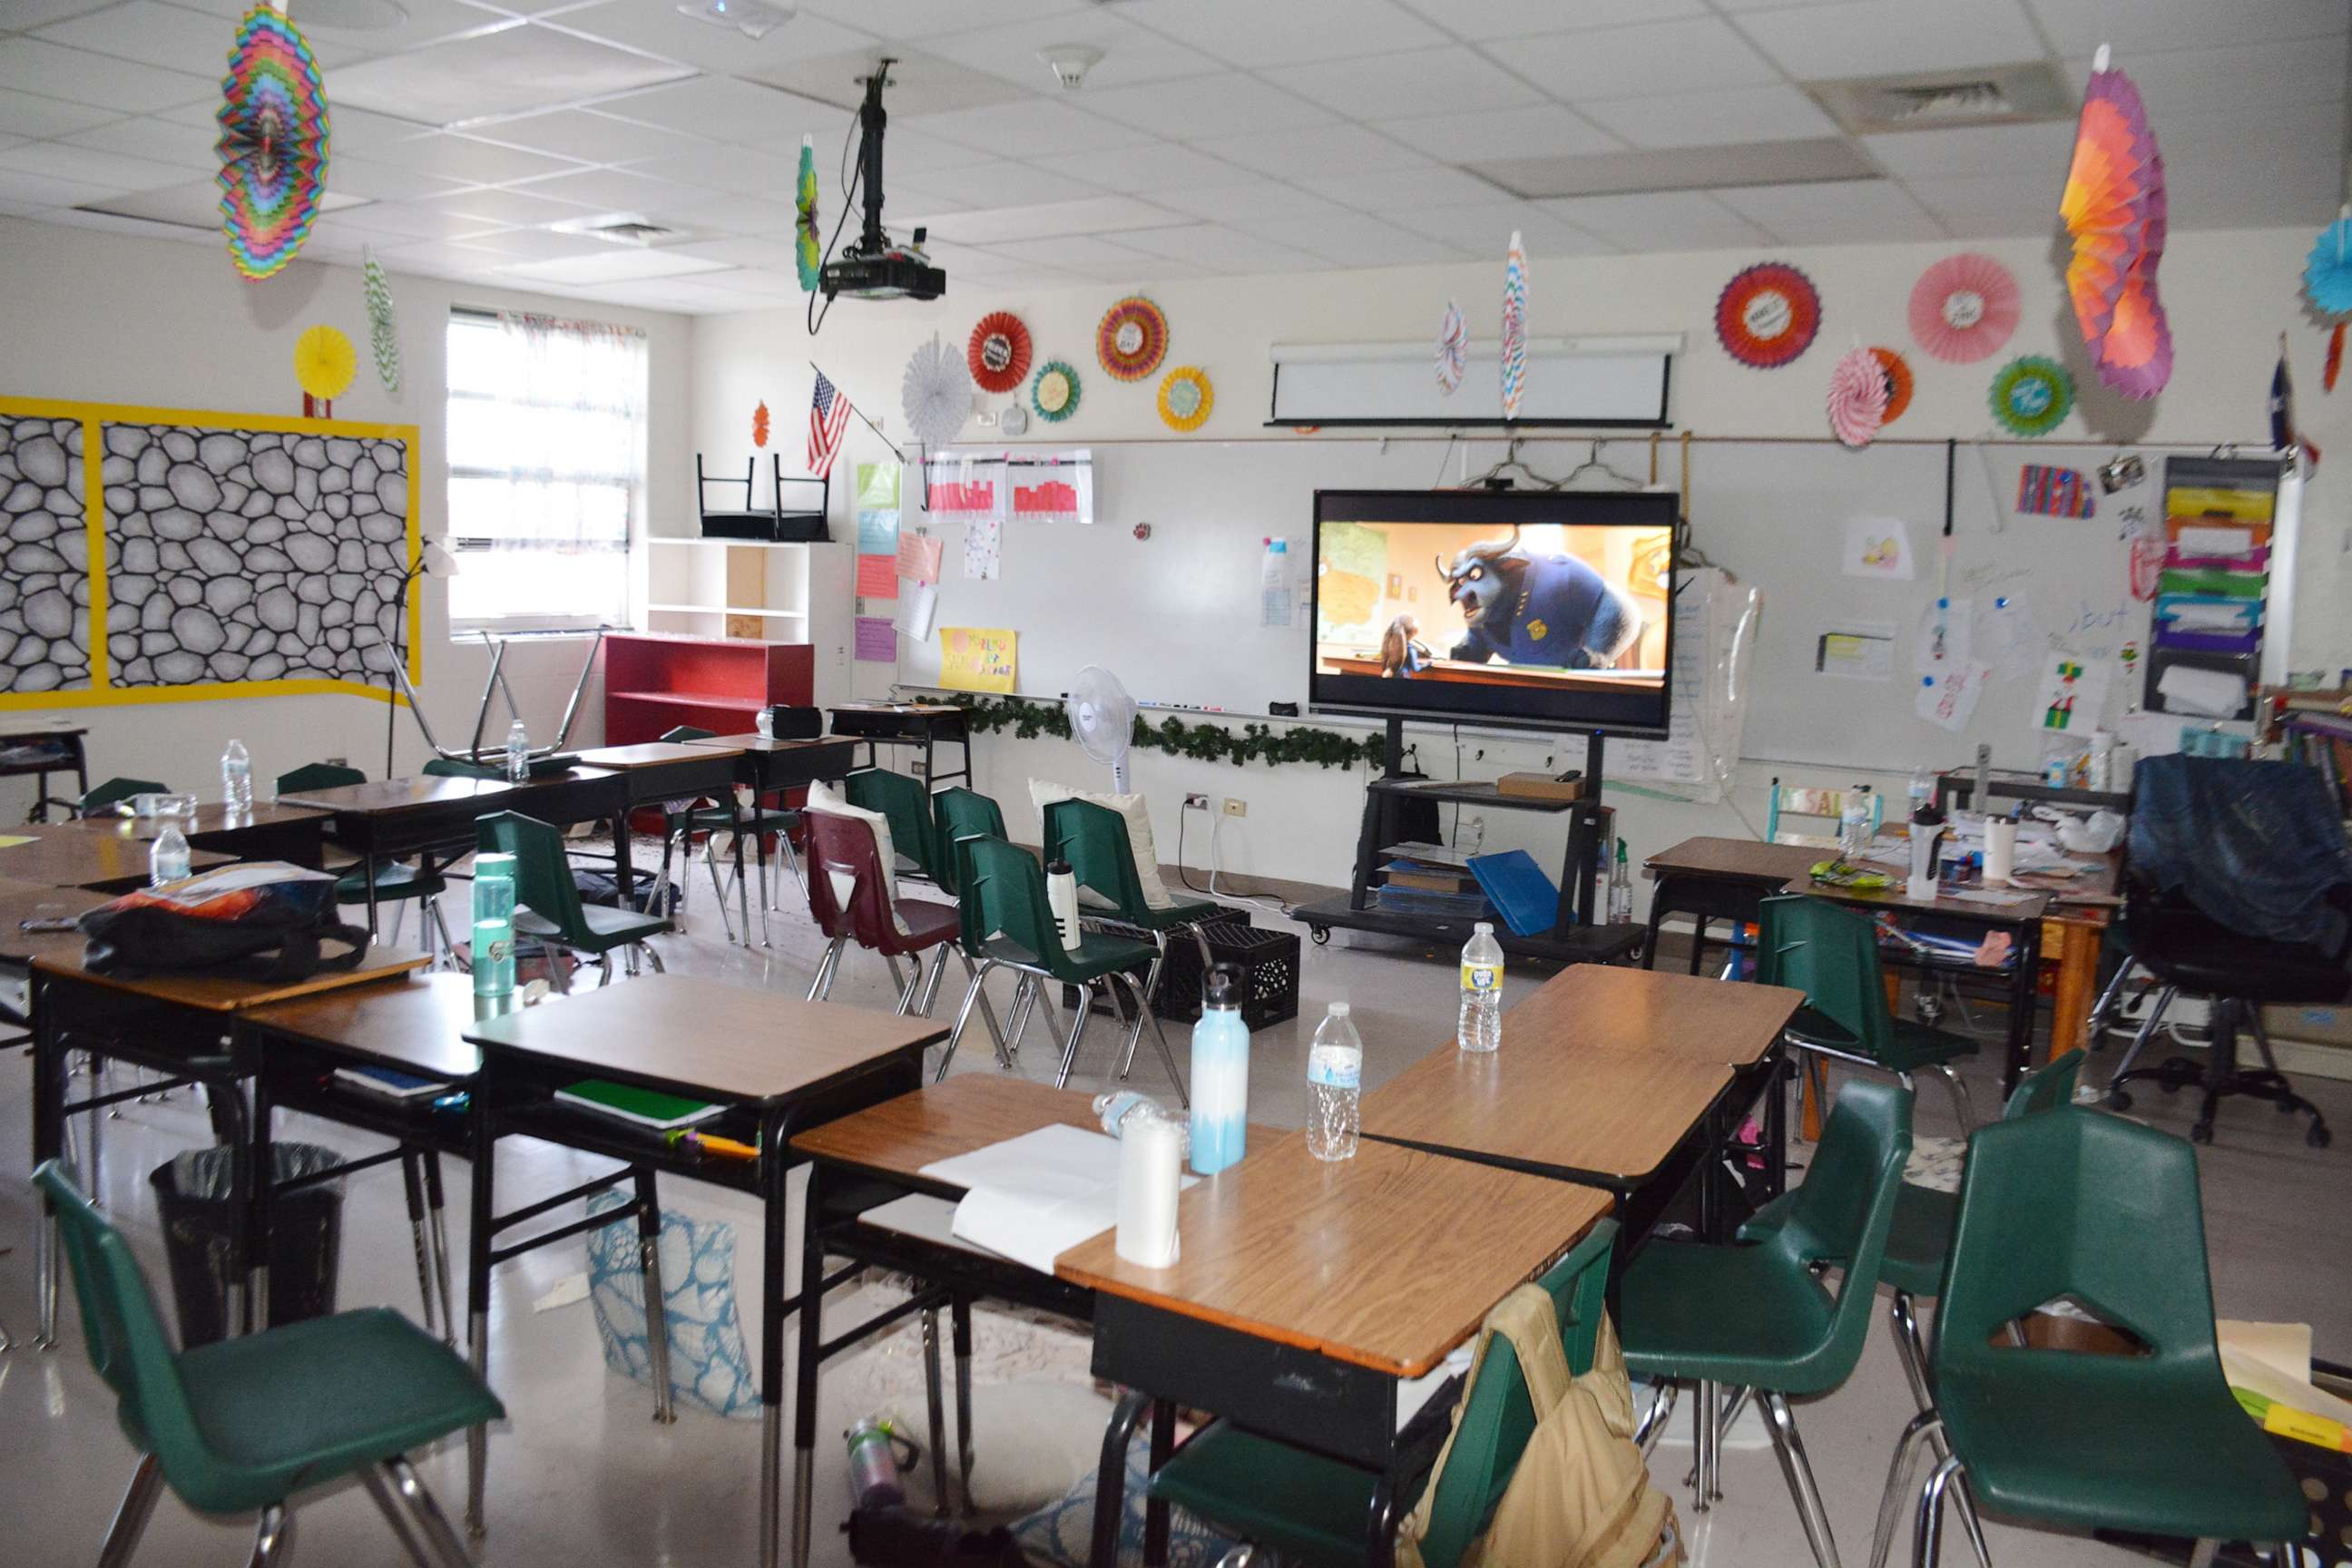 PHOTO: Inside room 106, where students were watching a movie moments before the shooter entered Robb Elementary.